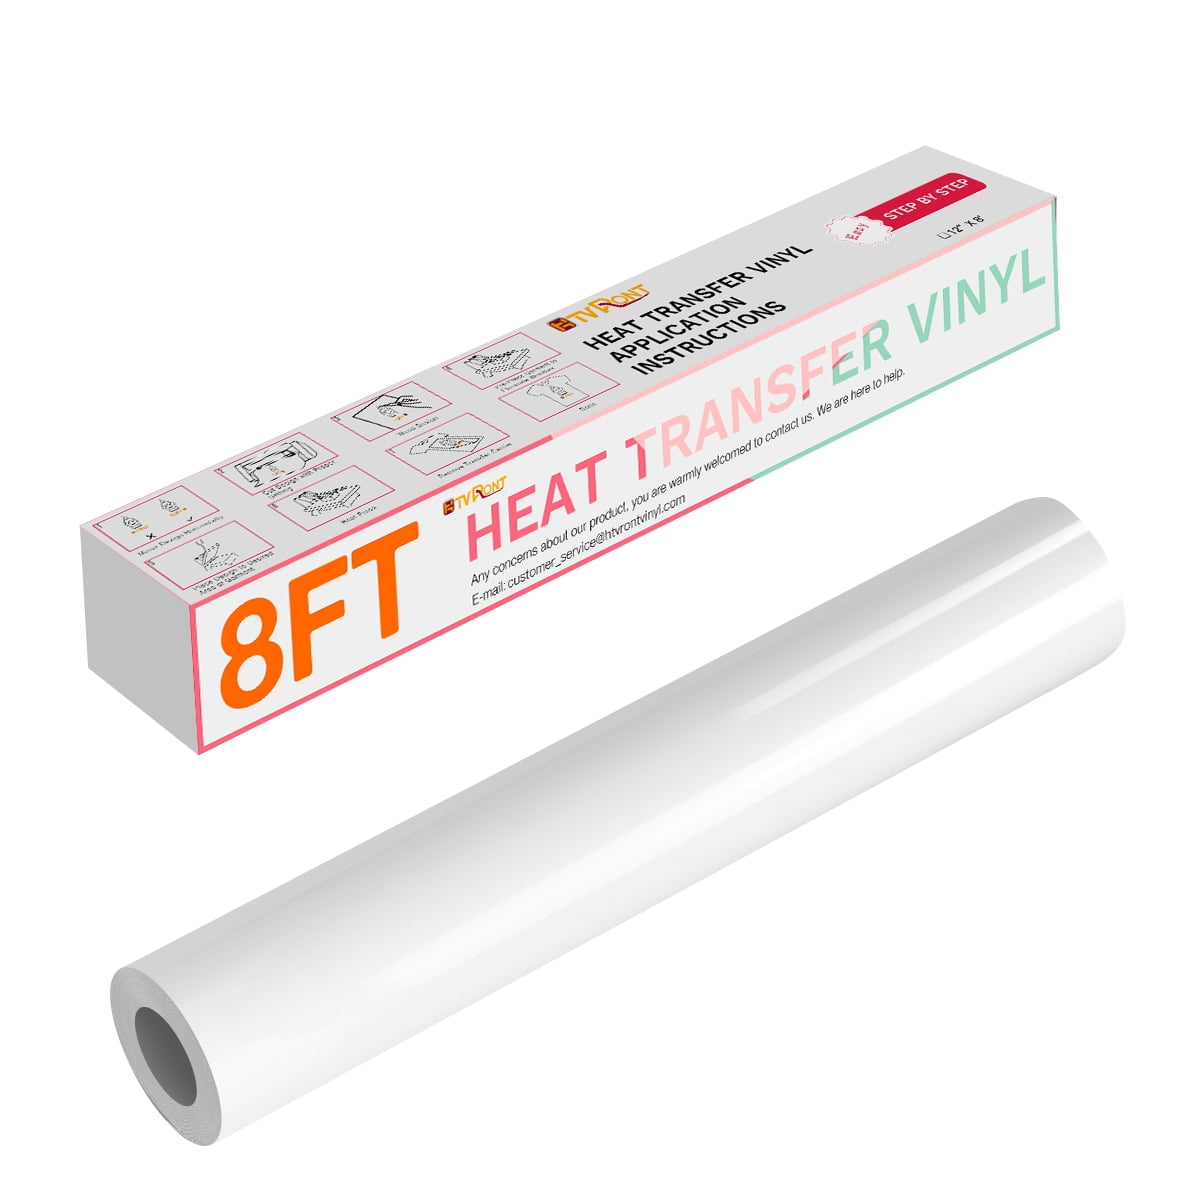 HTVRONT White Heat Transfer Vinyl Rolls - 2 Rolls 12 x 20ft White Iron on  Vinyl for Shirts, White HTV for All Cutter Machine - Easy to Cut & Weed for